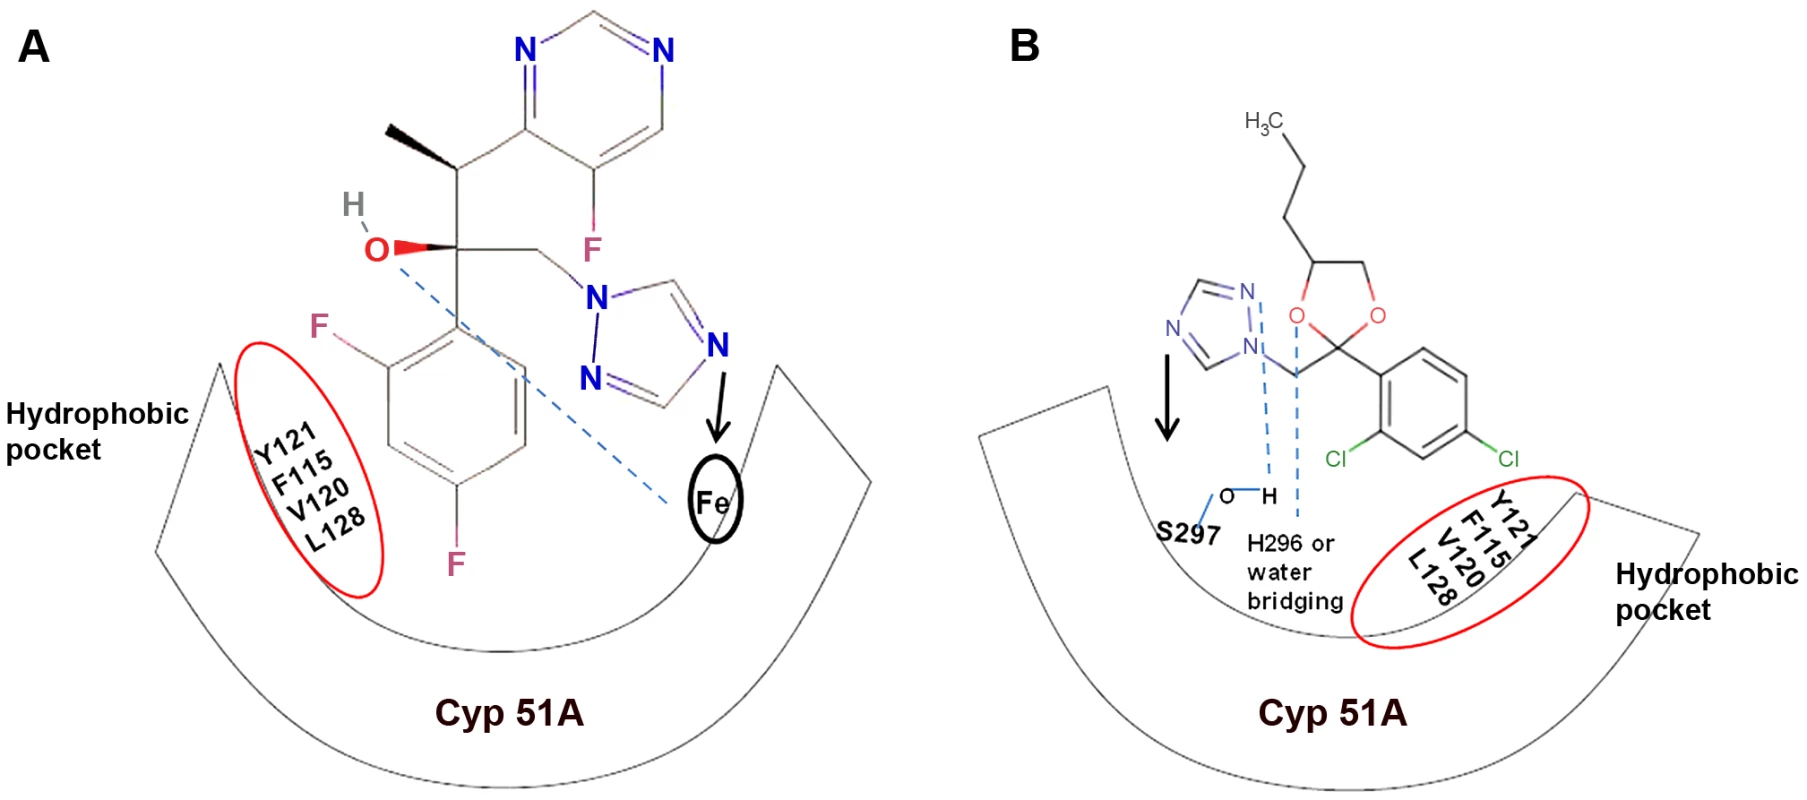 Diagrammatic representation of similar structural binding mode of medical triazoles and triazole fungicides to <i>cyp</i>51A of wild-type <i>A. fumigatus</i>.